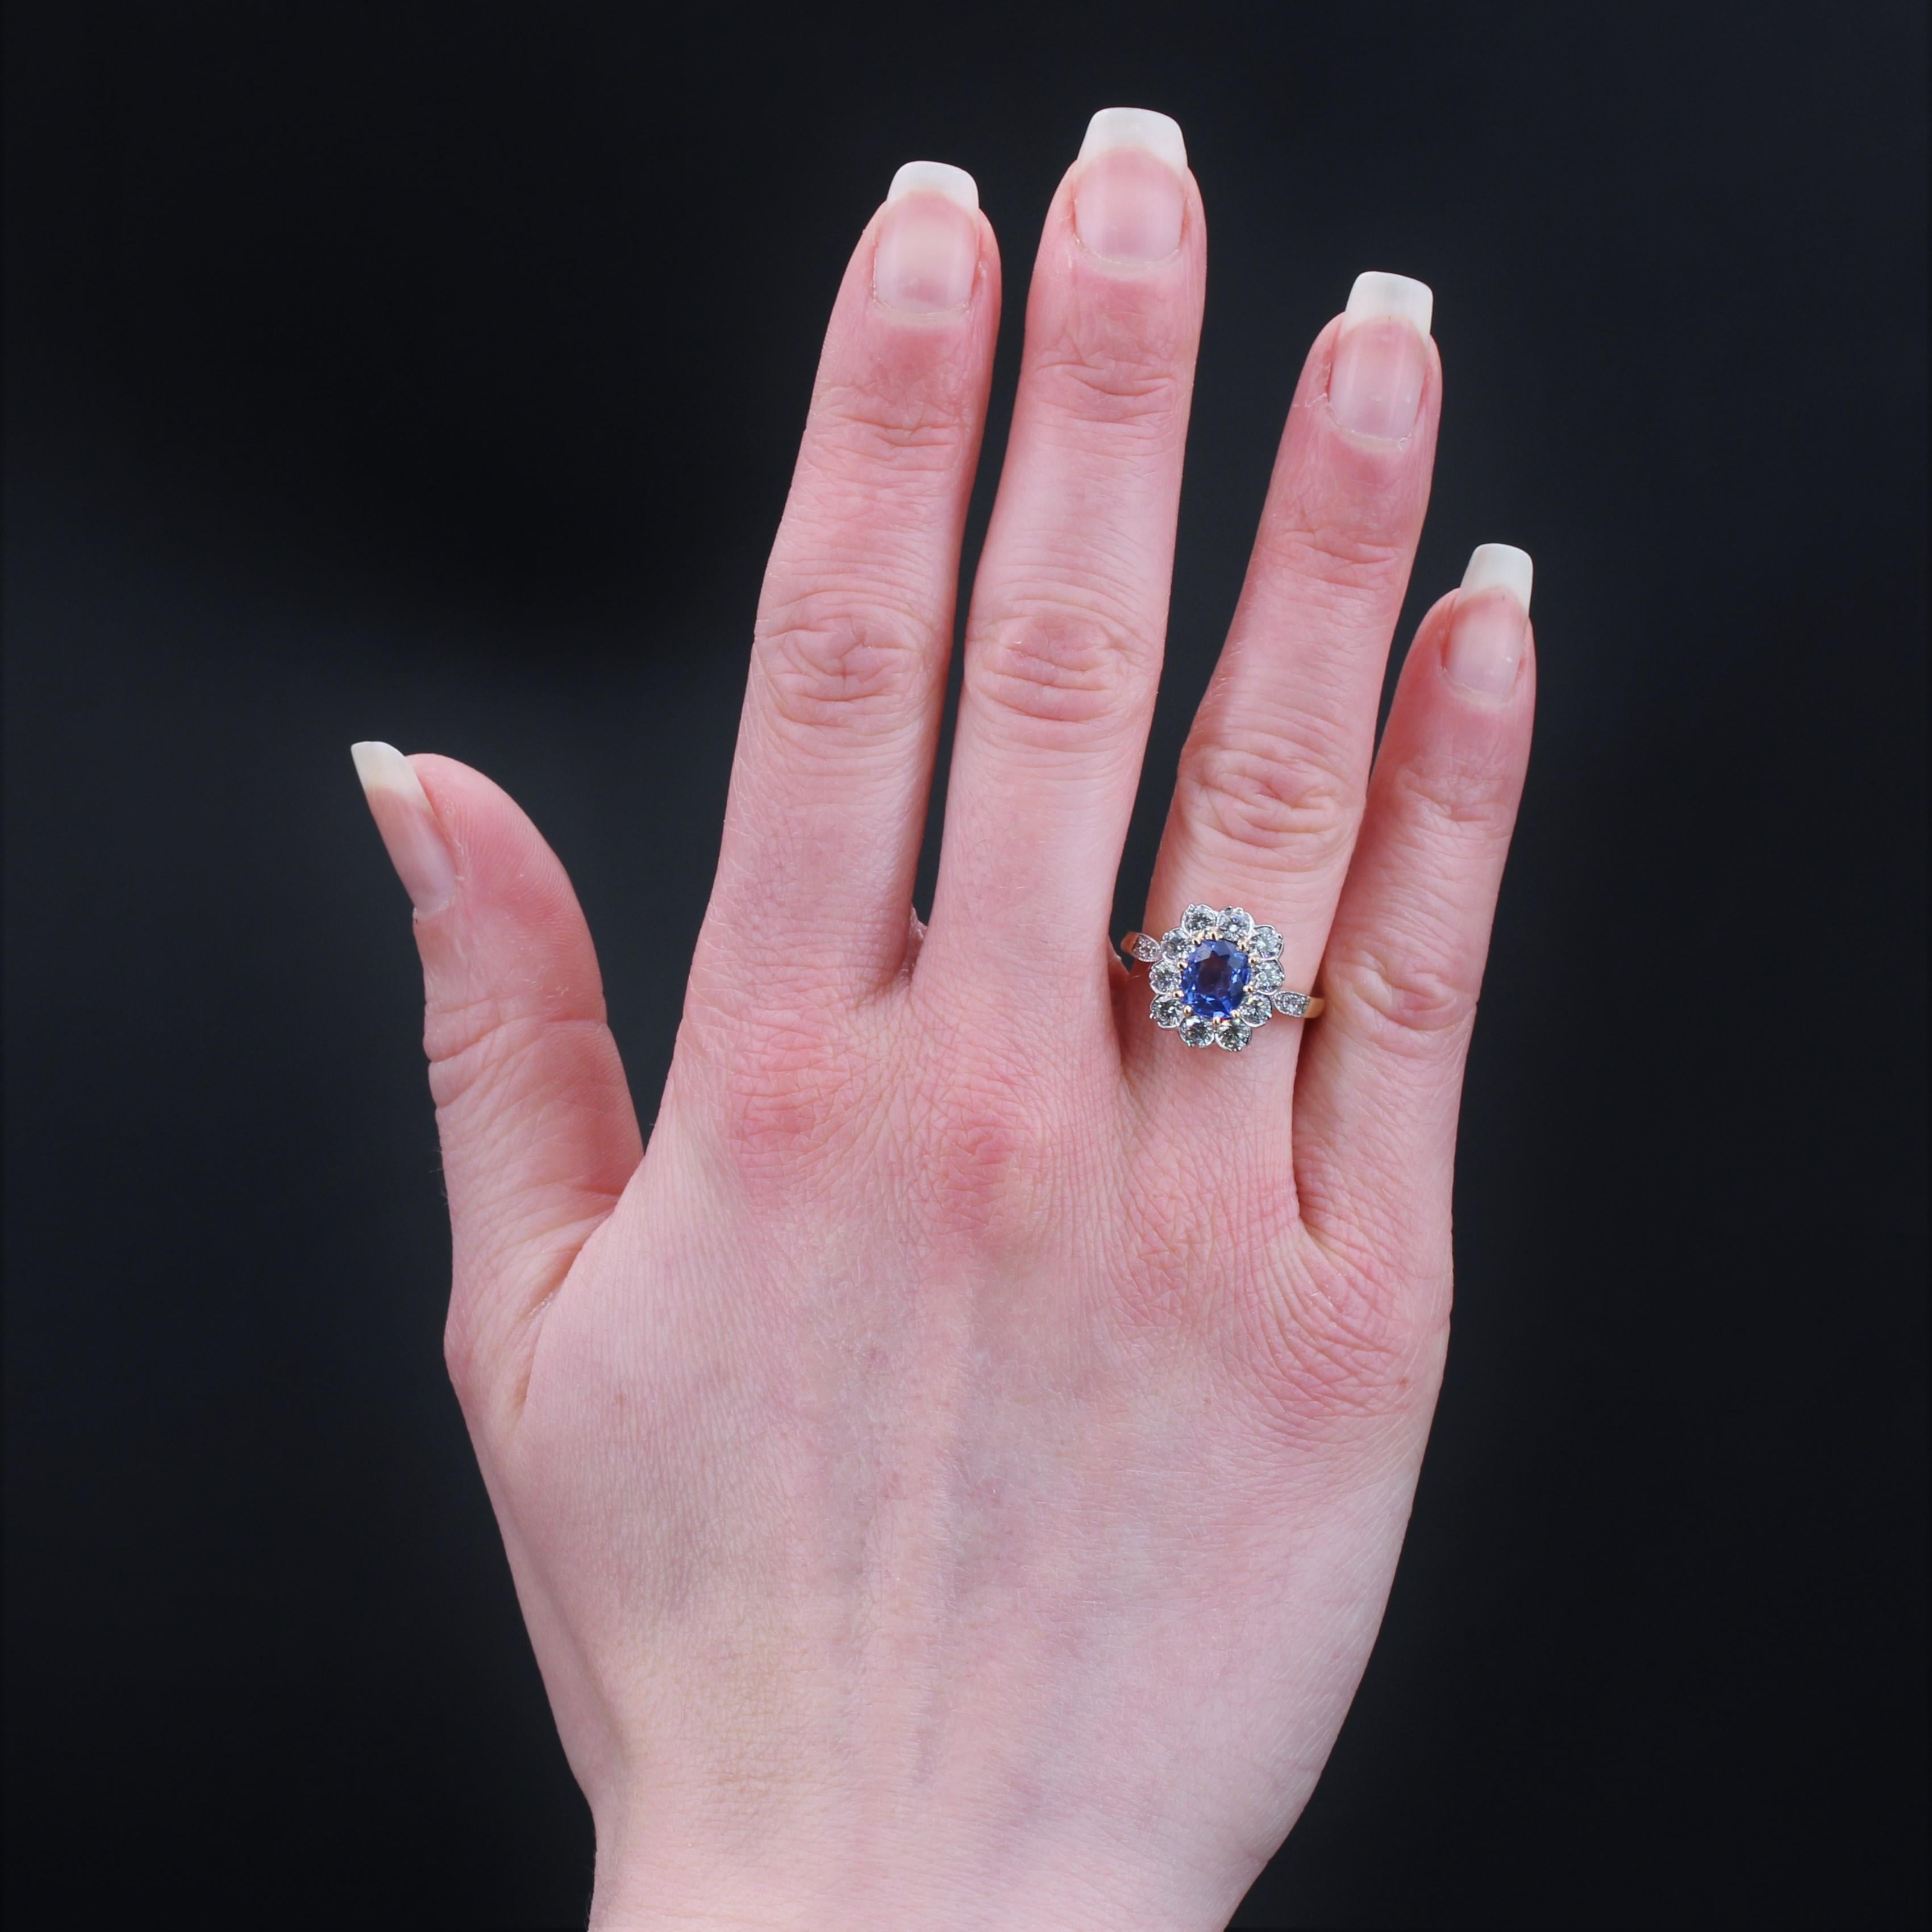 Ring in 18 karat yellow gold, eagle head hallmark and platinum, dog head hallmark.
Charming engagement ring, it is composed of a flower-shaped motif whose heart is a cushion-cut sapphire held in claws and the petals of modern brilliant-cut diamonds.